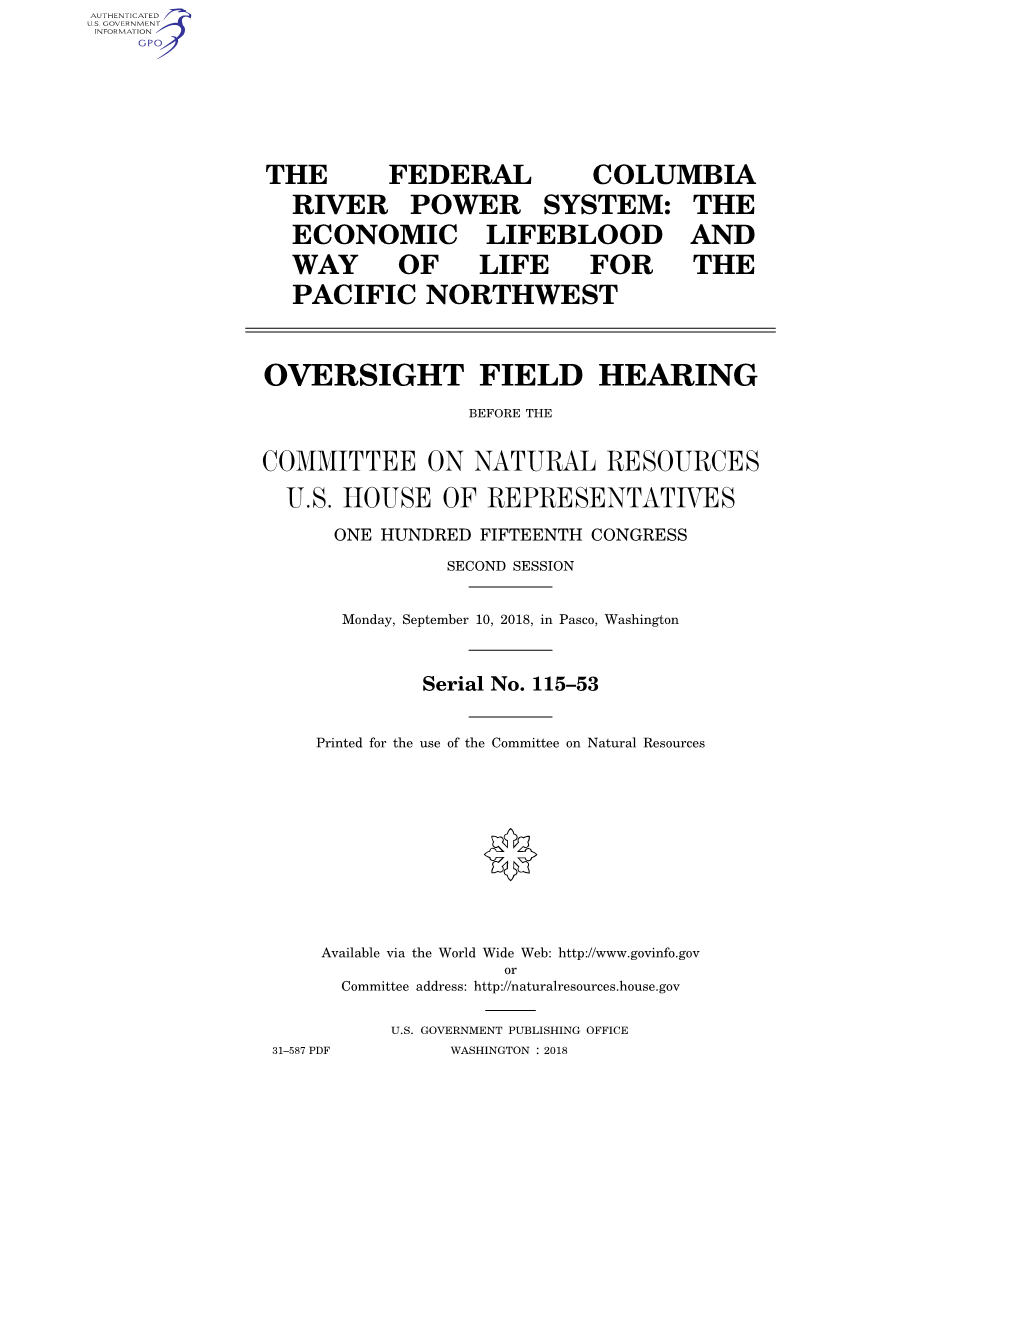 Oversight Field Hearing Committee on Natural